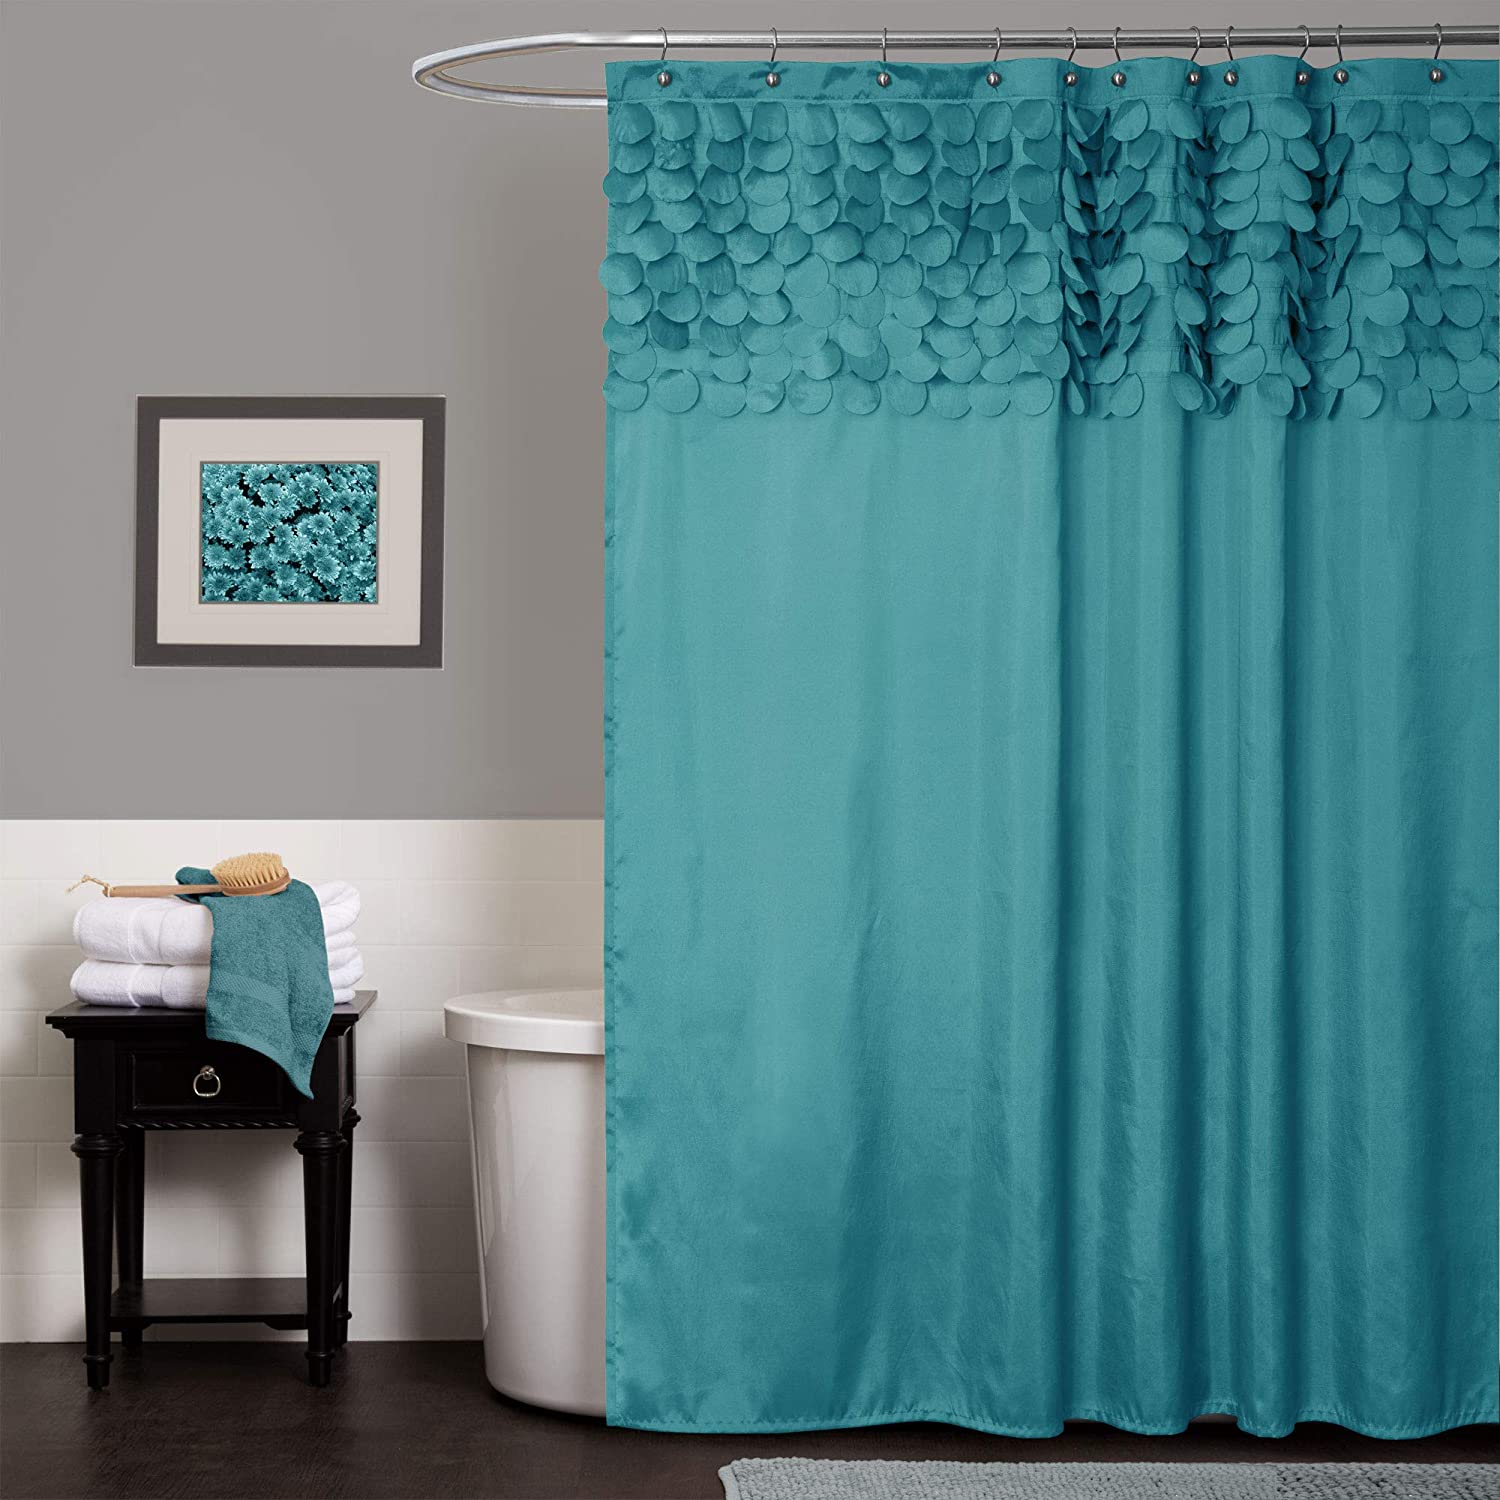 Shower curtain can add texture and comfort to your bathroom